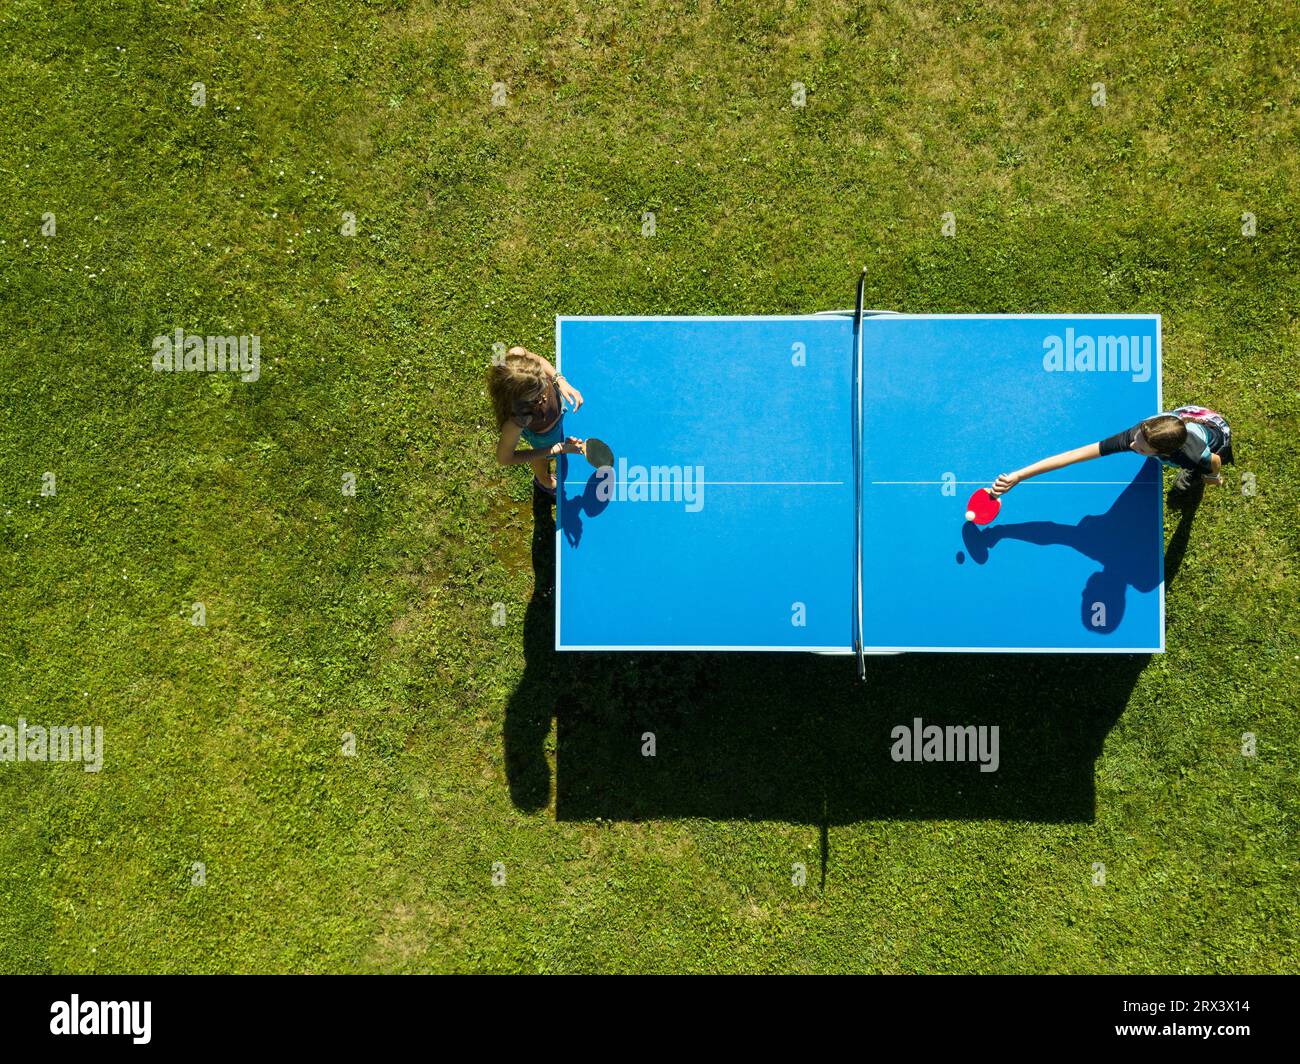 Aerial view people playing ping pong match outdoor. Top view two boys playing table tennis on a green grass lawn. Aerial view outdoor sport Stock Photo